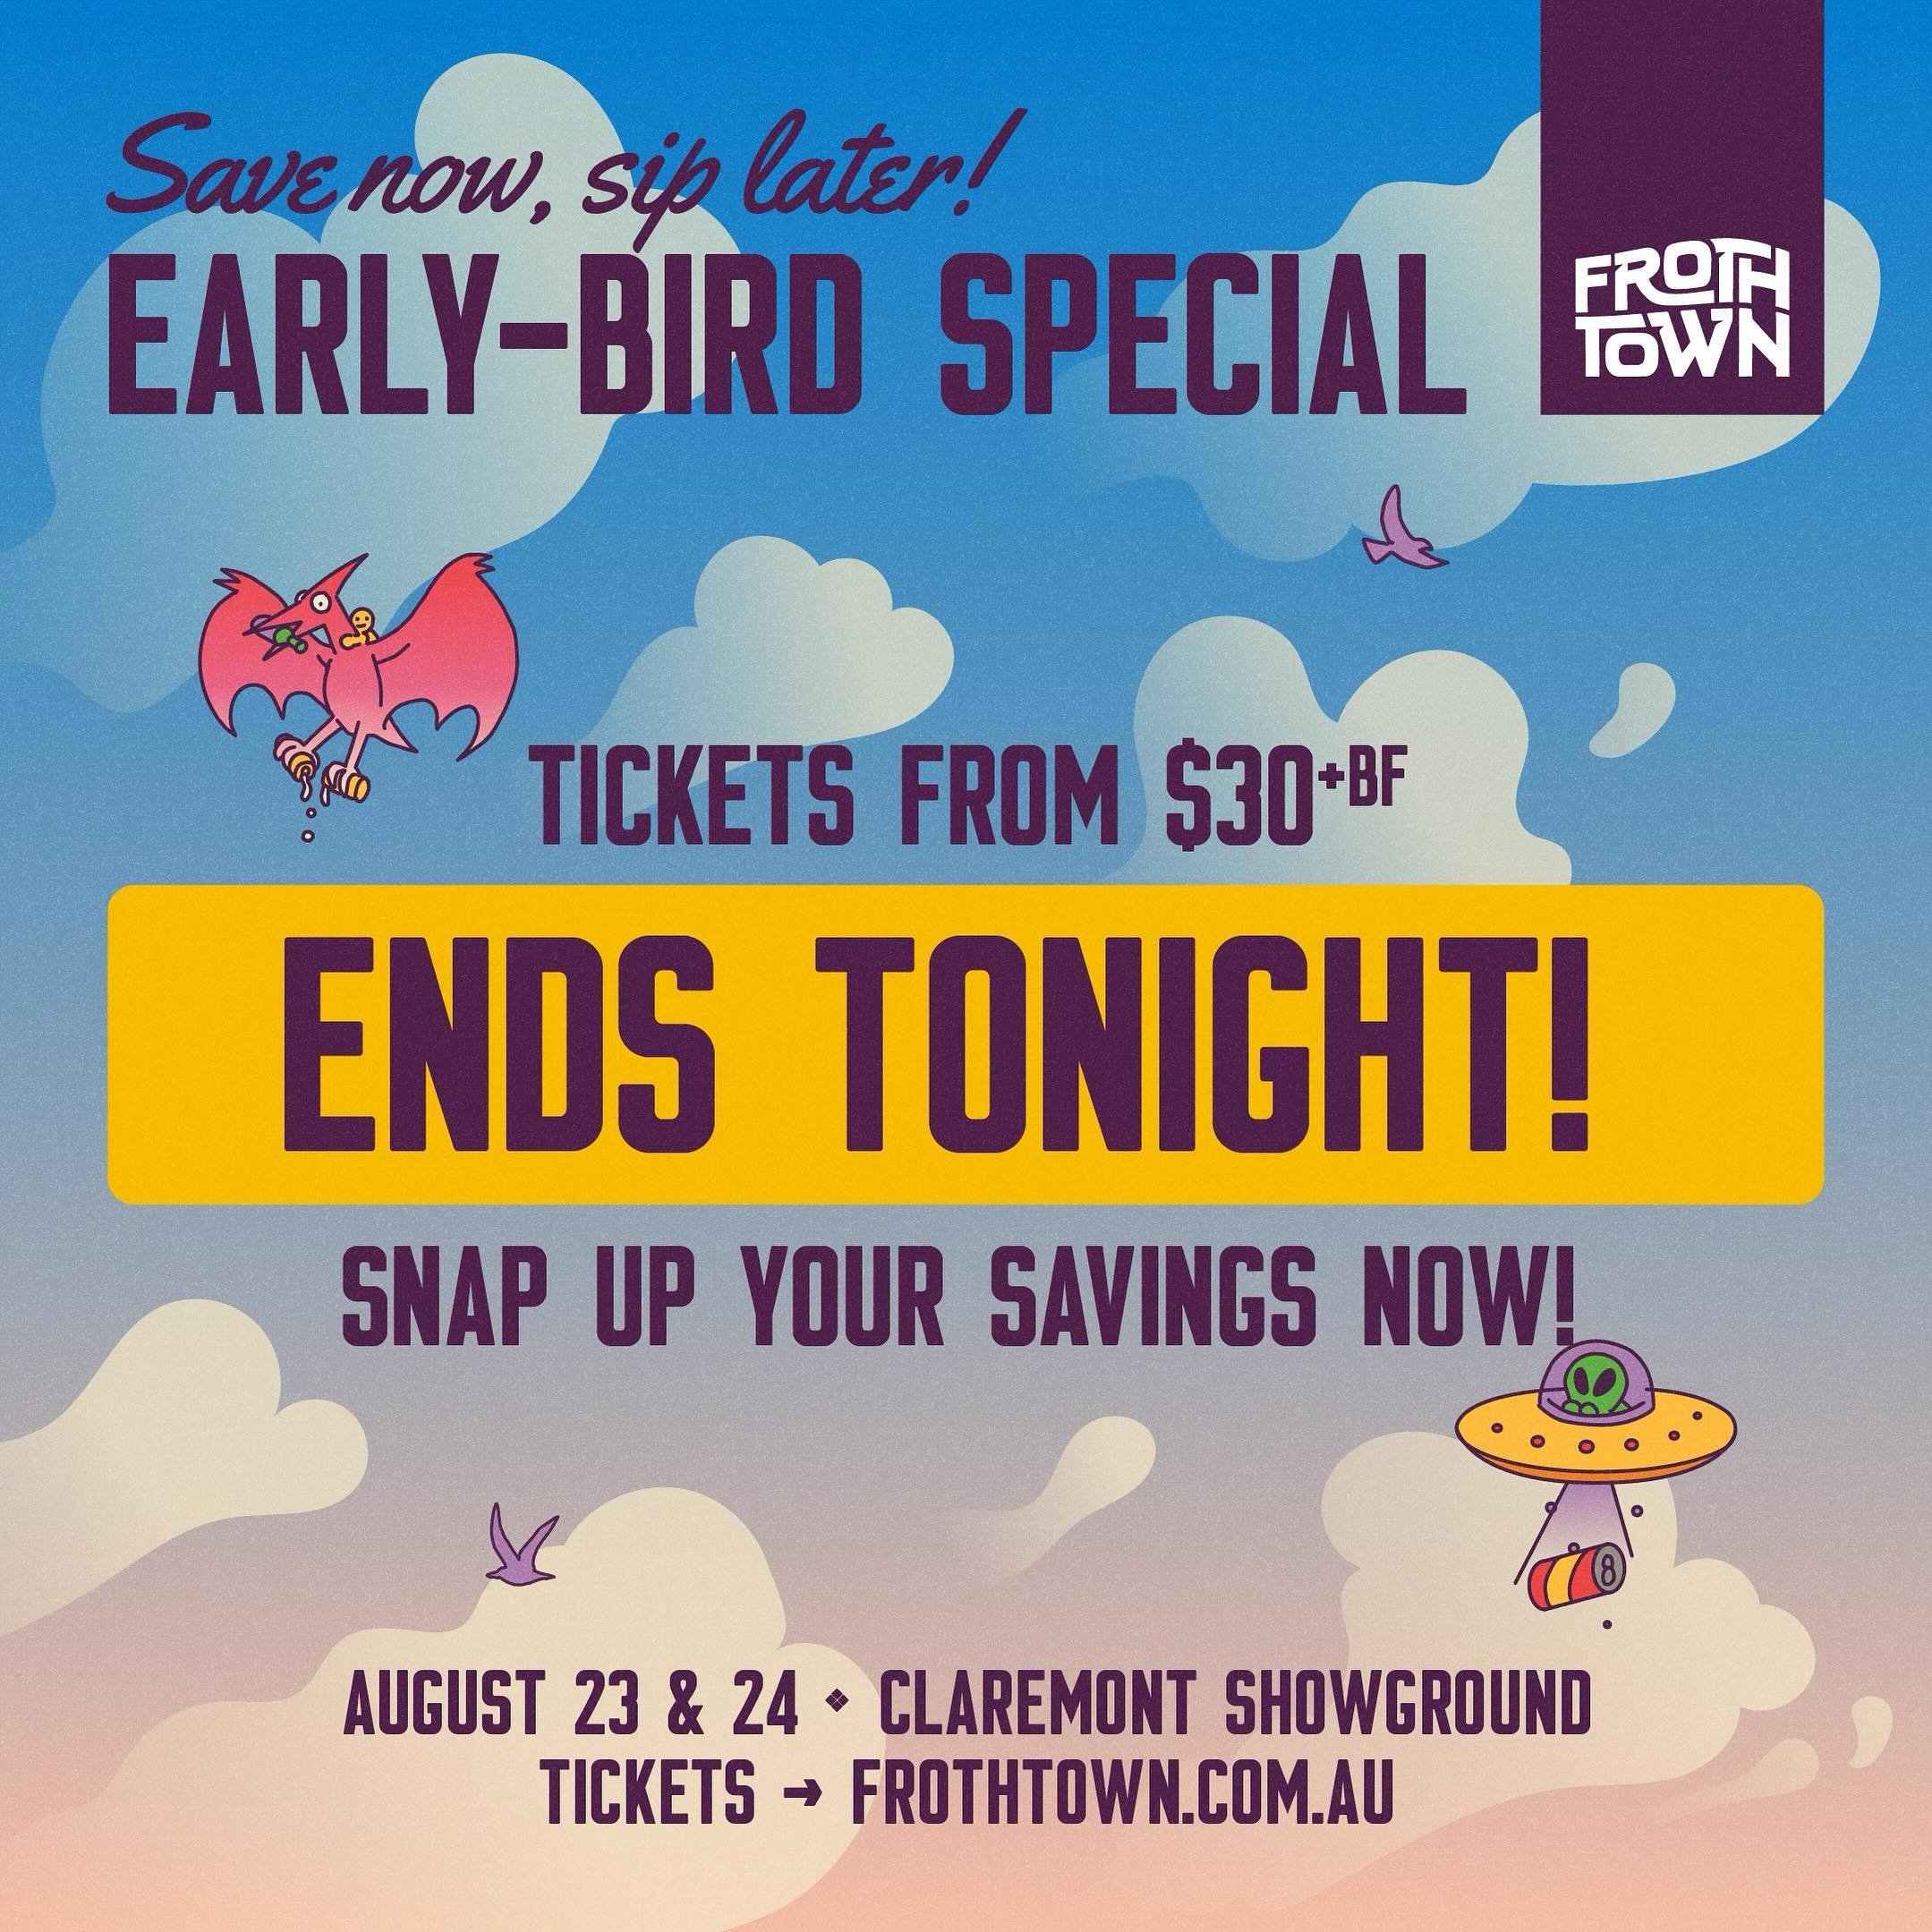 ⏳ Tick-tock, beer &amp; booze lovers! 🕒 
It&rsquo;s your last chance to score early bird tickets to Froth Town. 
‼️Early-bird closes TONIGHT at midnight. 
Get your tickets now &amp; make sure you don&rsquo;t let this deal slip away 🎟️ bit.ly/froth2